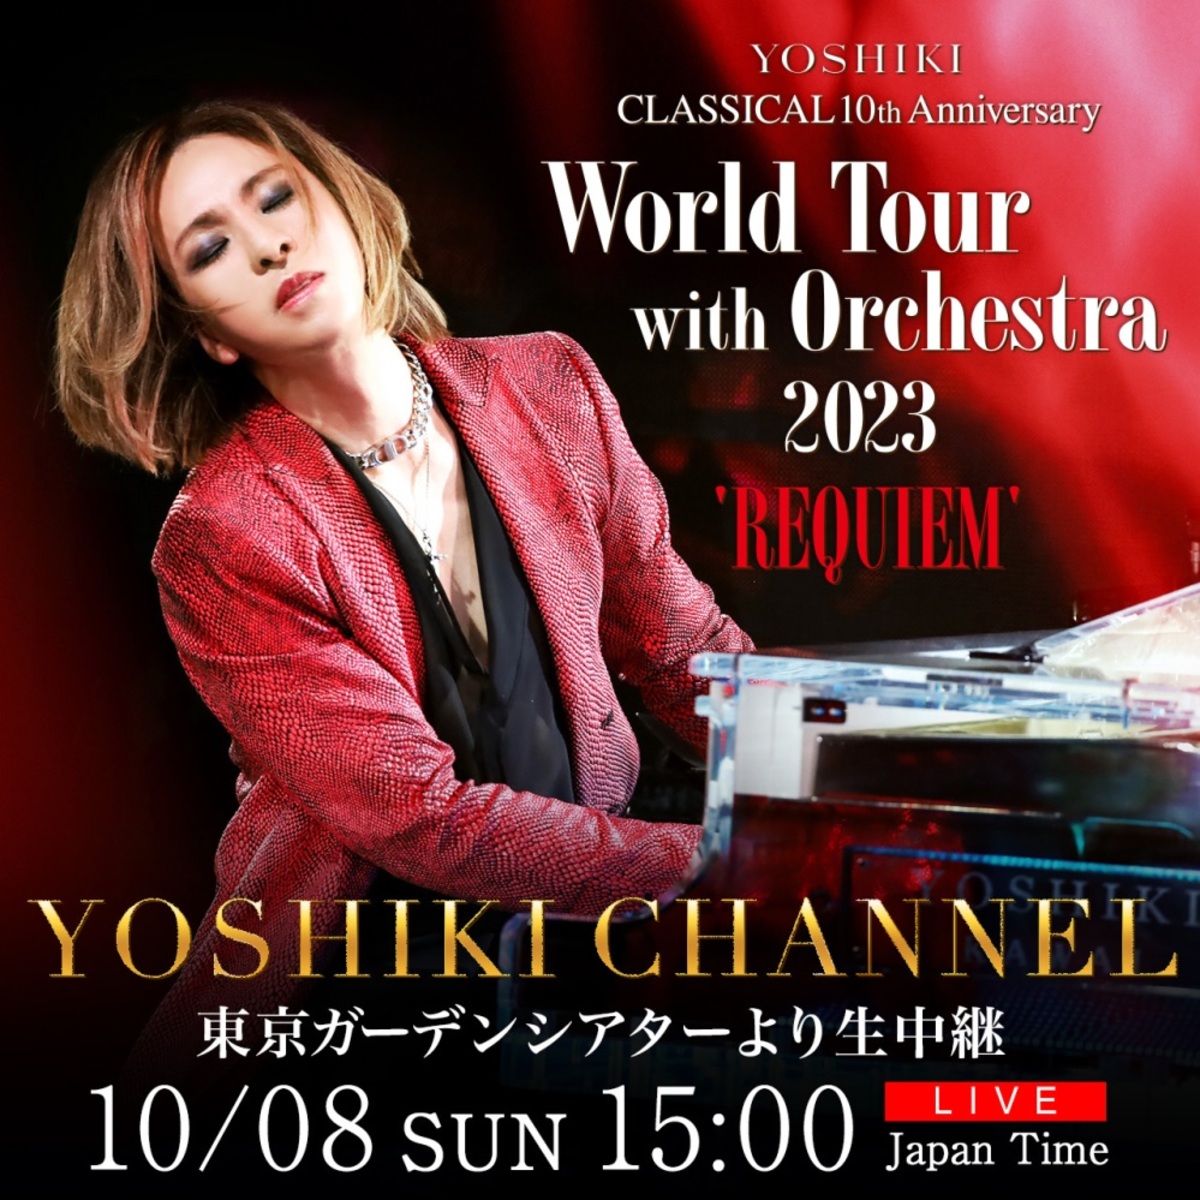 YOSHIKI CLASSICAL with Orchestra 2022 in JAPAN 9月18日(日) ペア ２ 